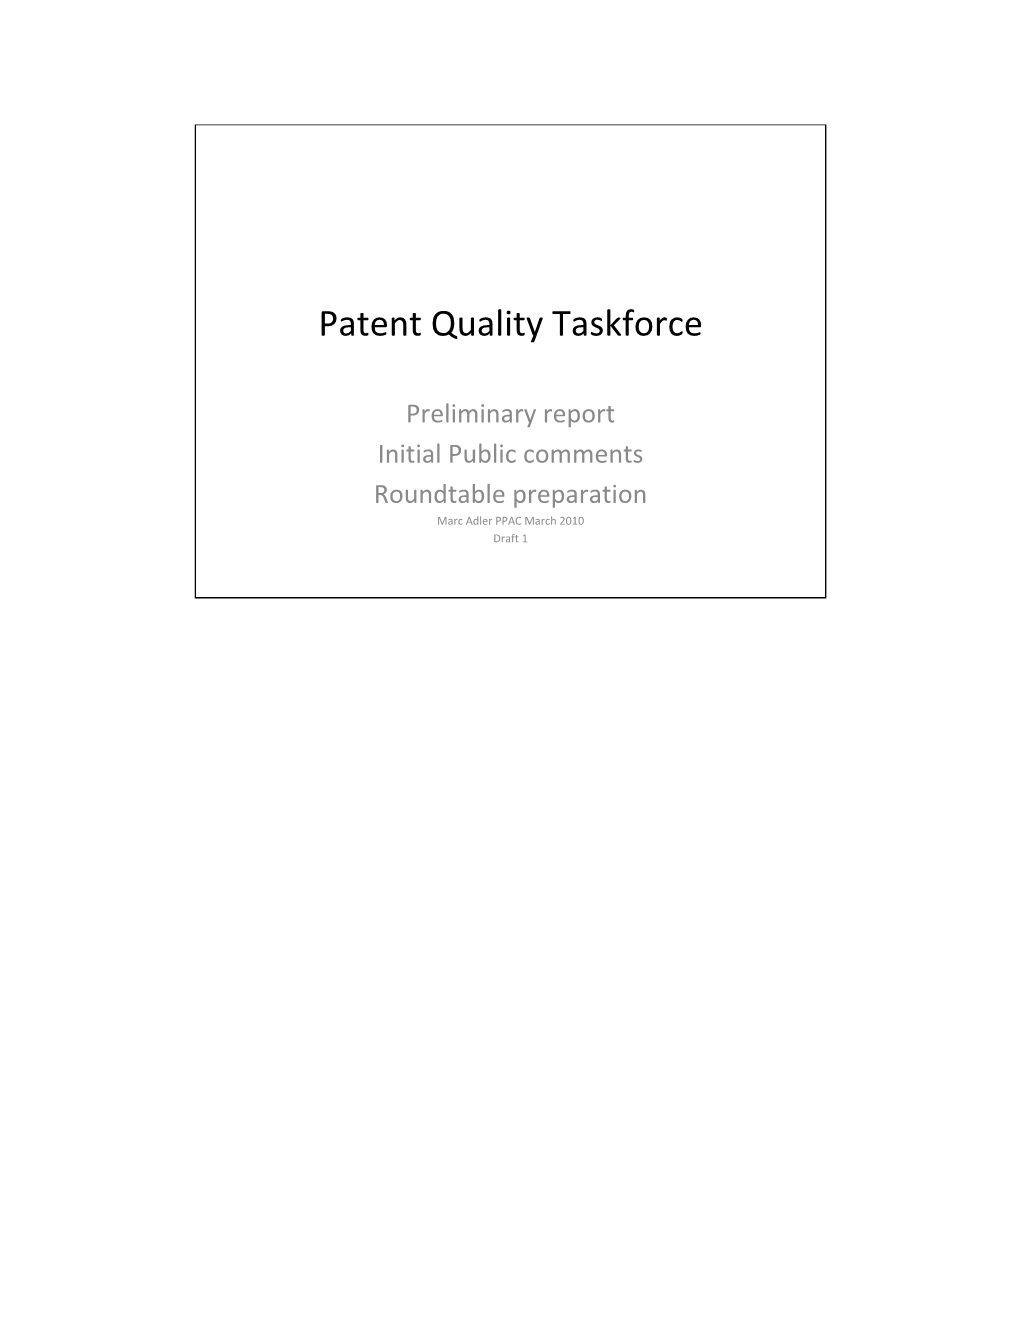 Patent Quality Taskforce: Preliminary Report, Initial Public Comments, And